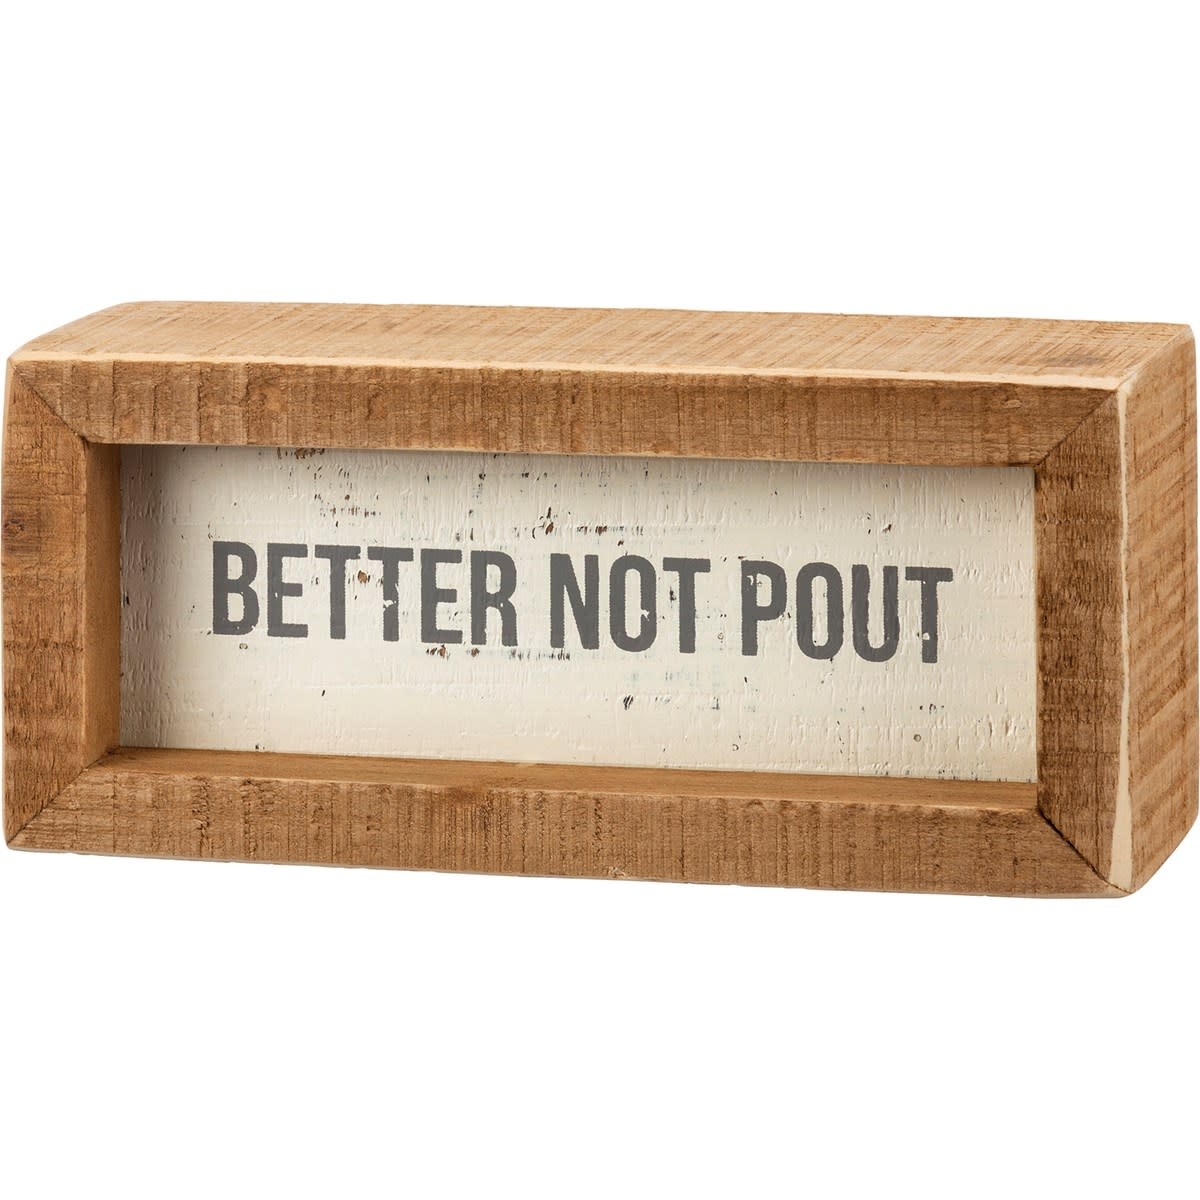 Better Not Pout Inset Box Sign - Rustic Roots